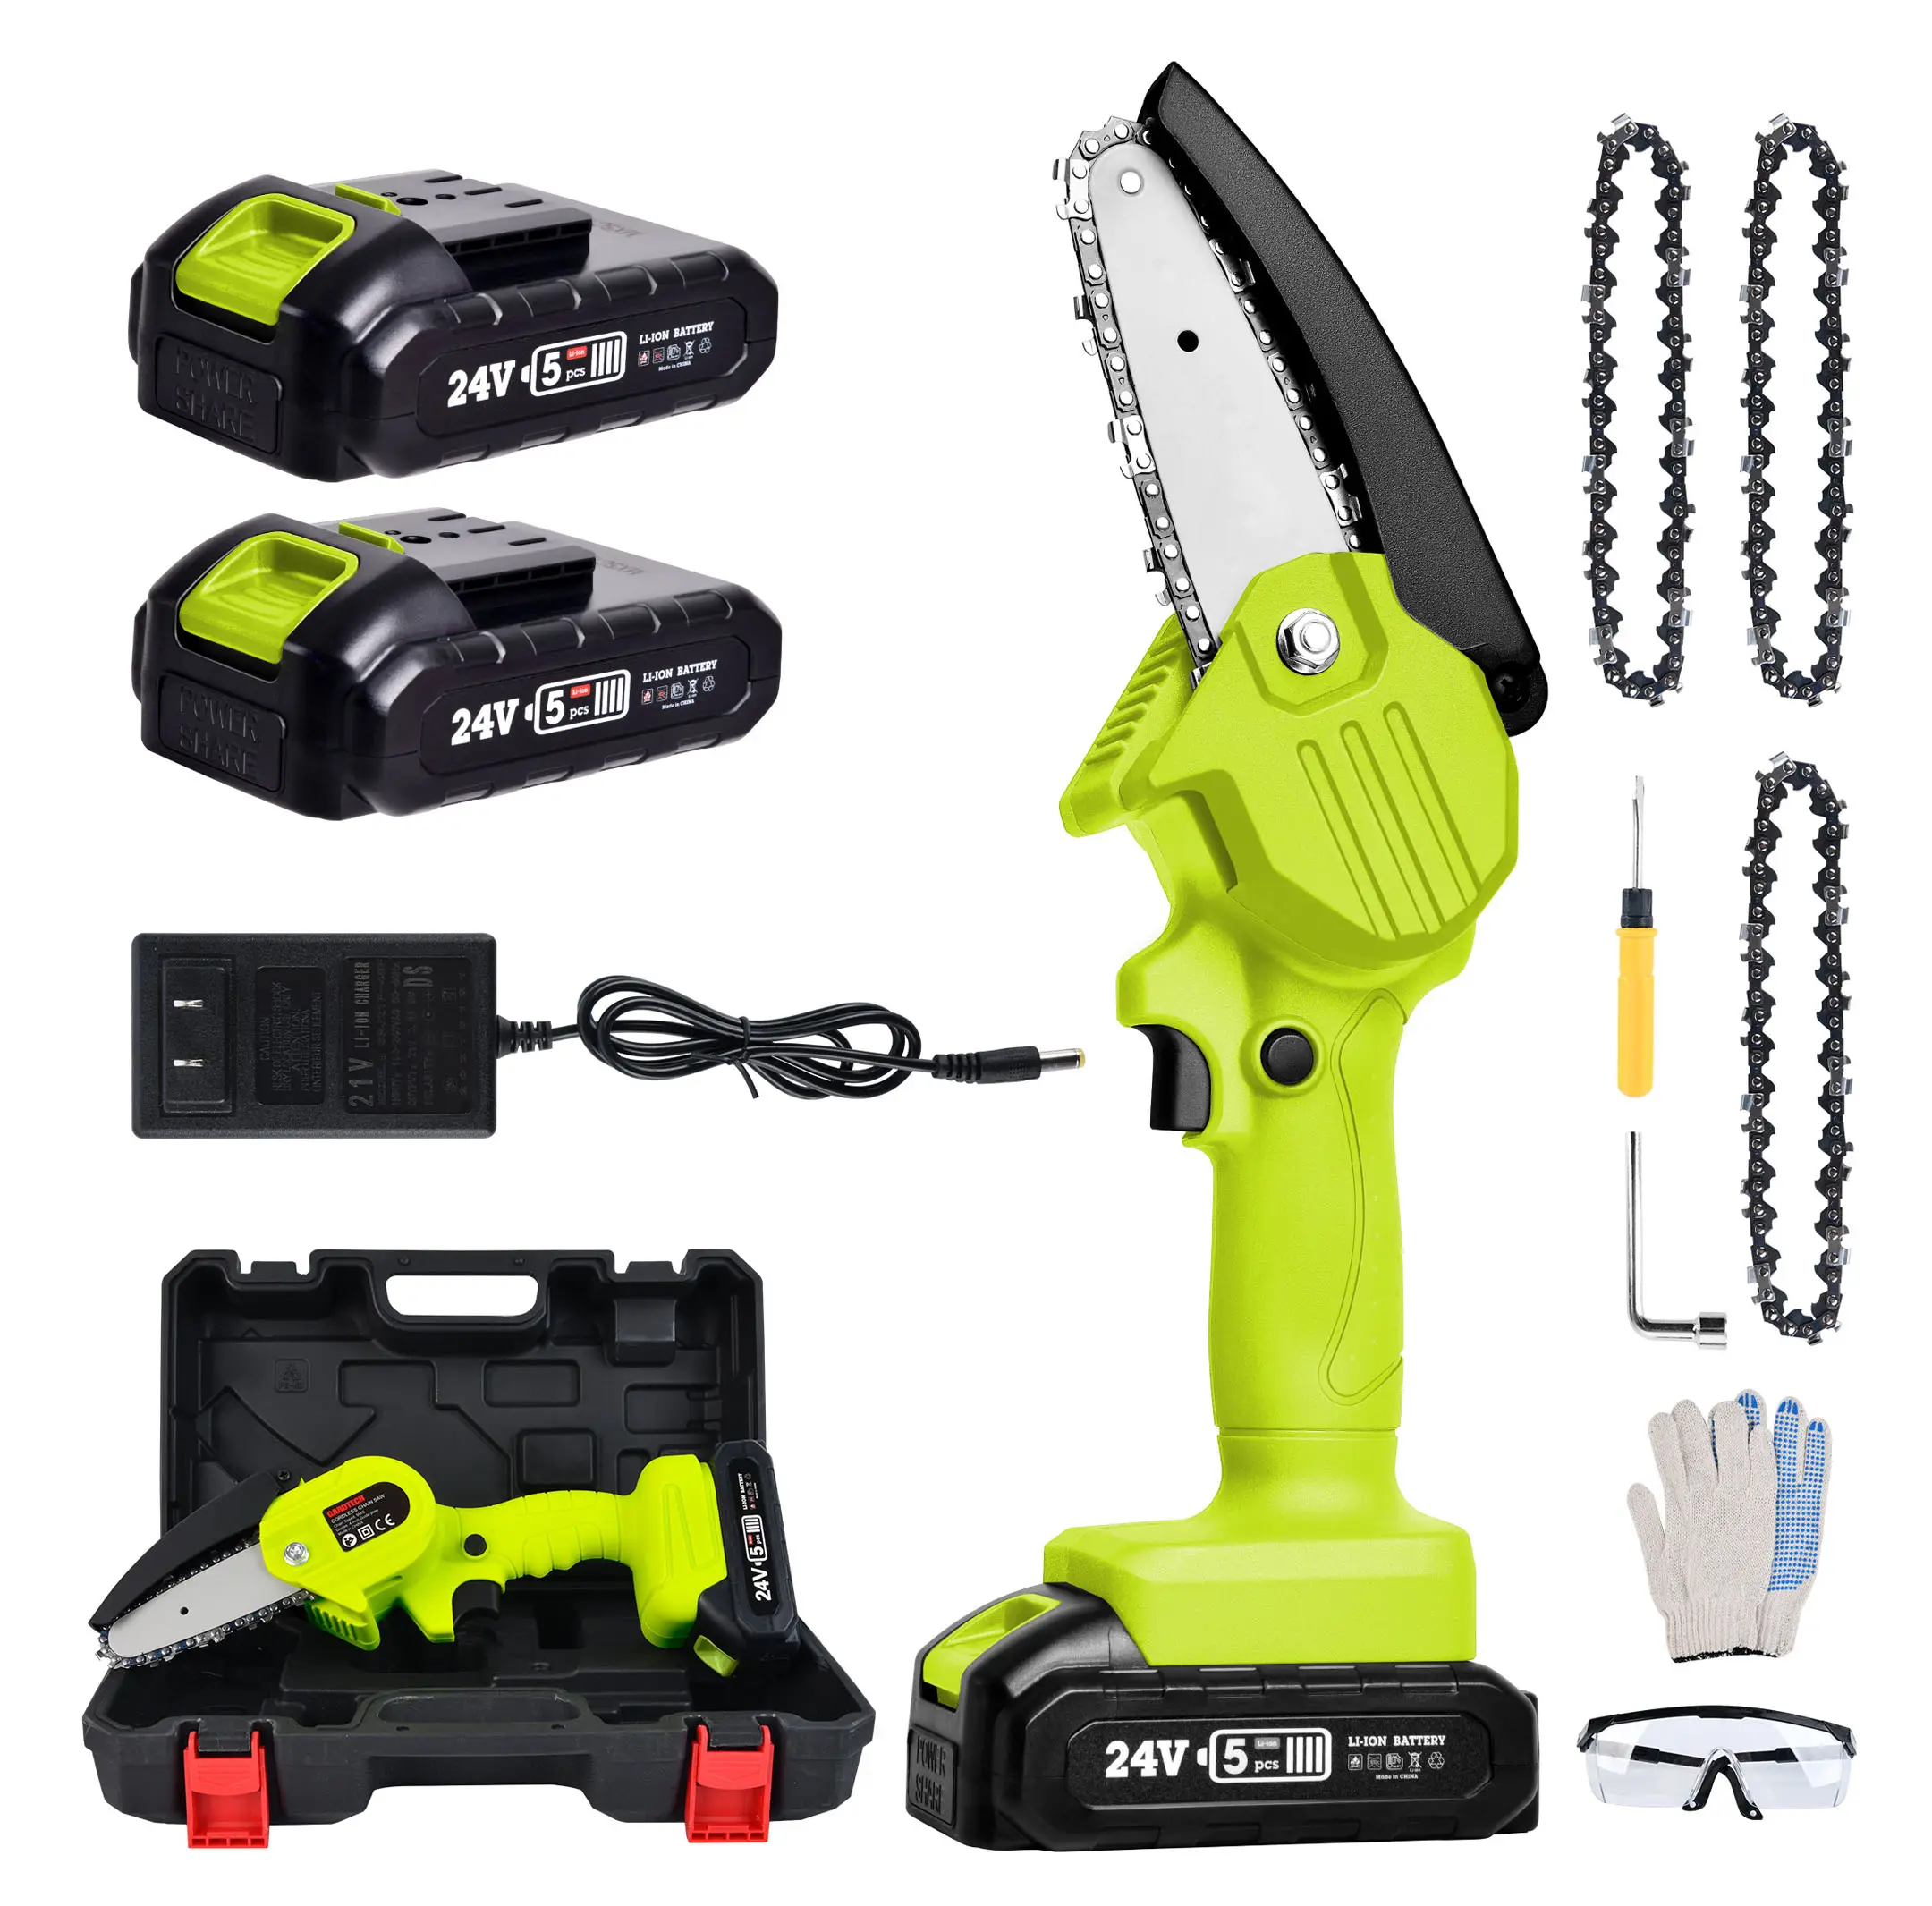 VERTAK 20V battery cheap hand chainsaw price 4 inch mini cordless electric chainsaw battery not included